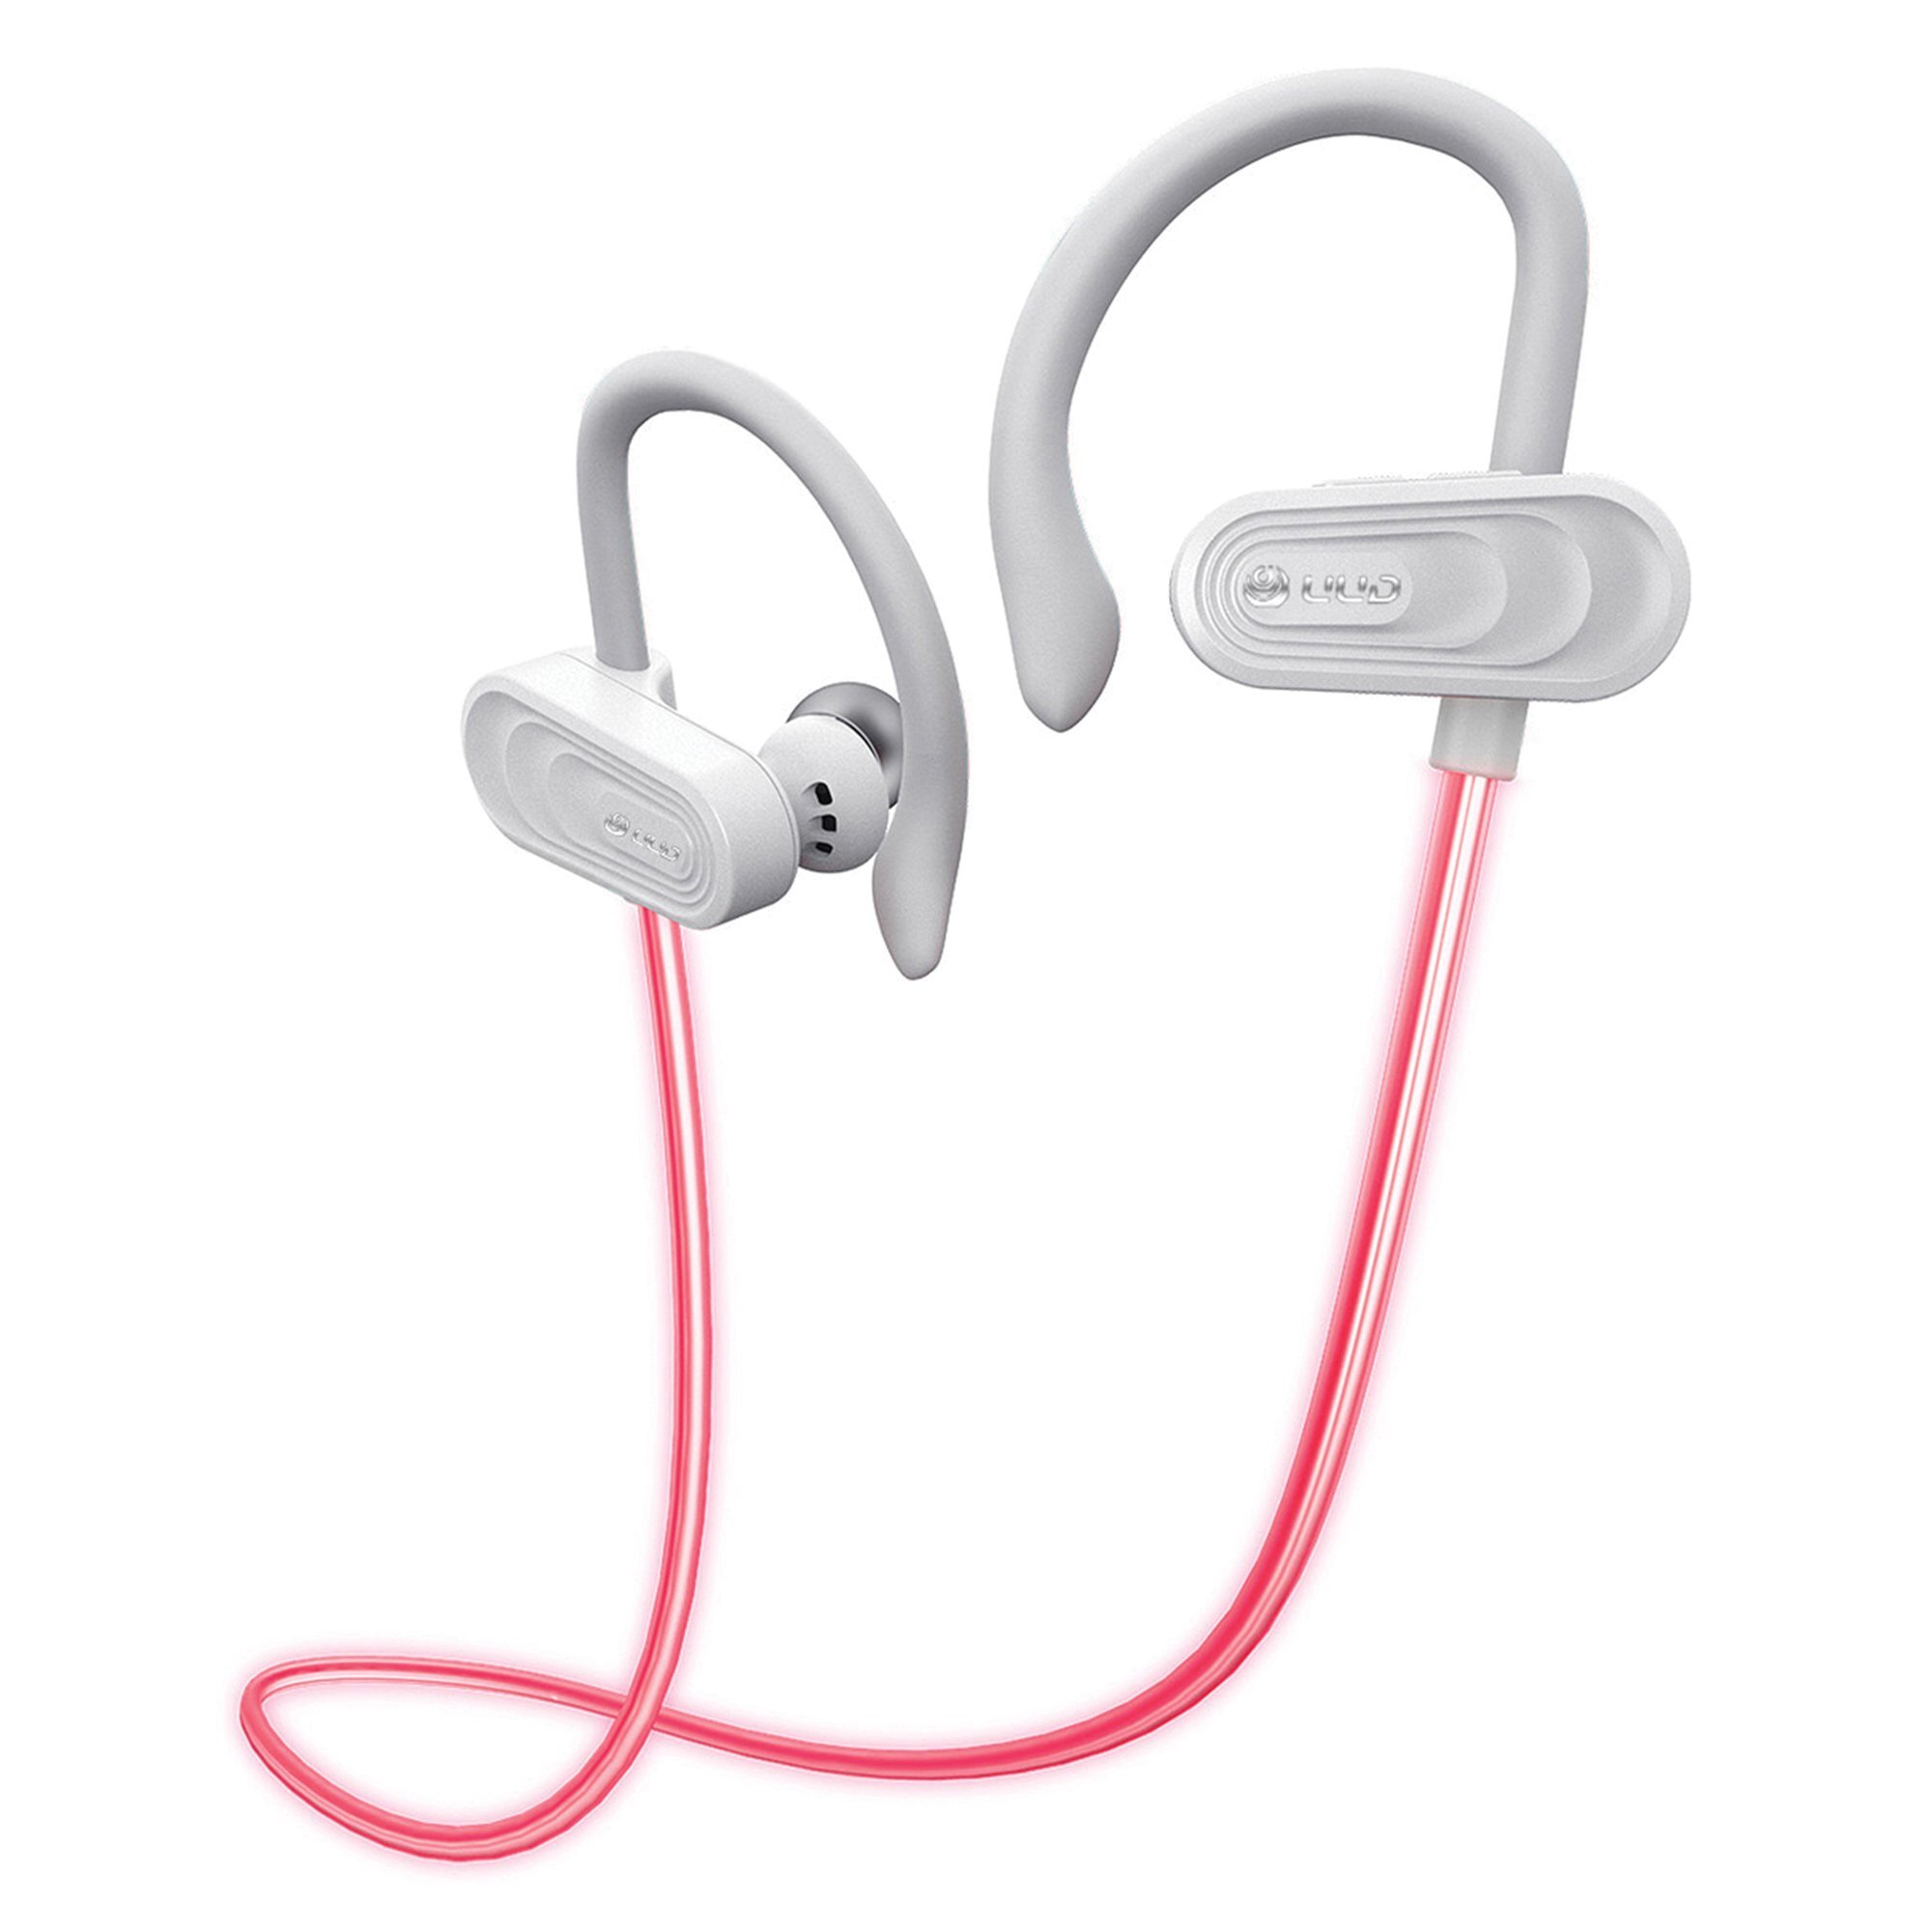 TOKK TMX09W Glow In-Ear Bluetooth Earbuds with Microphone (White)